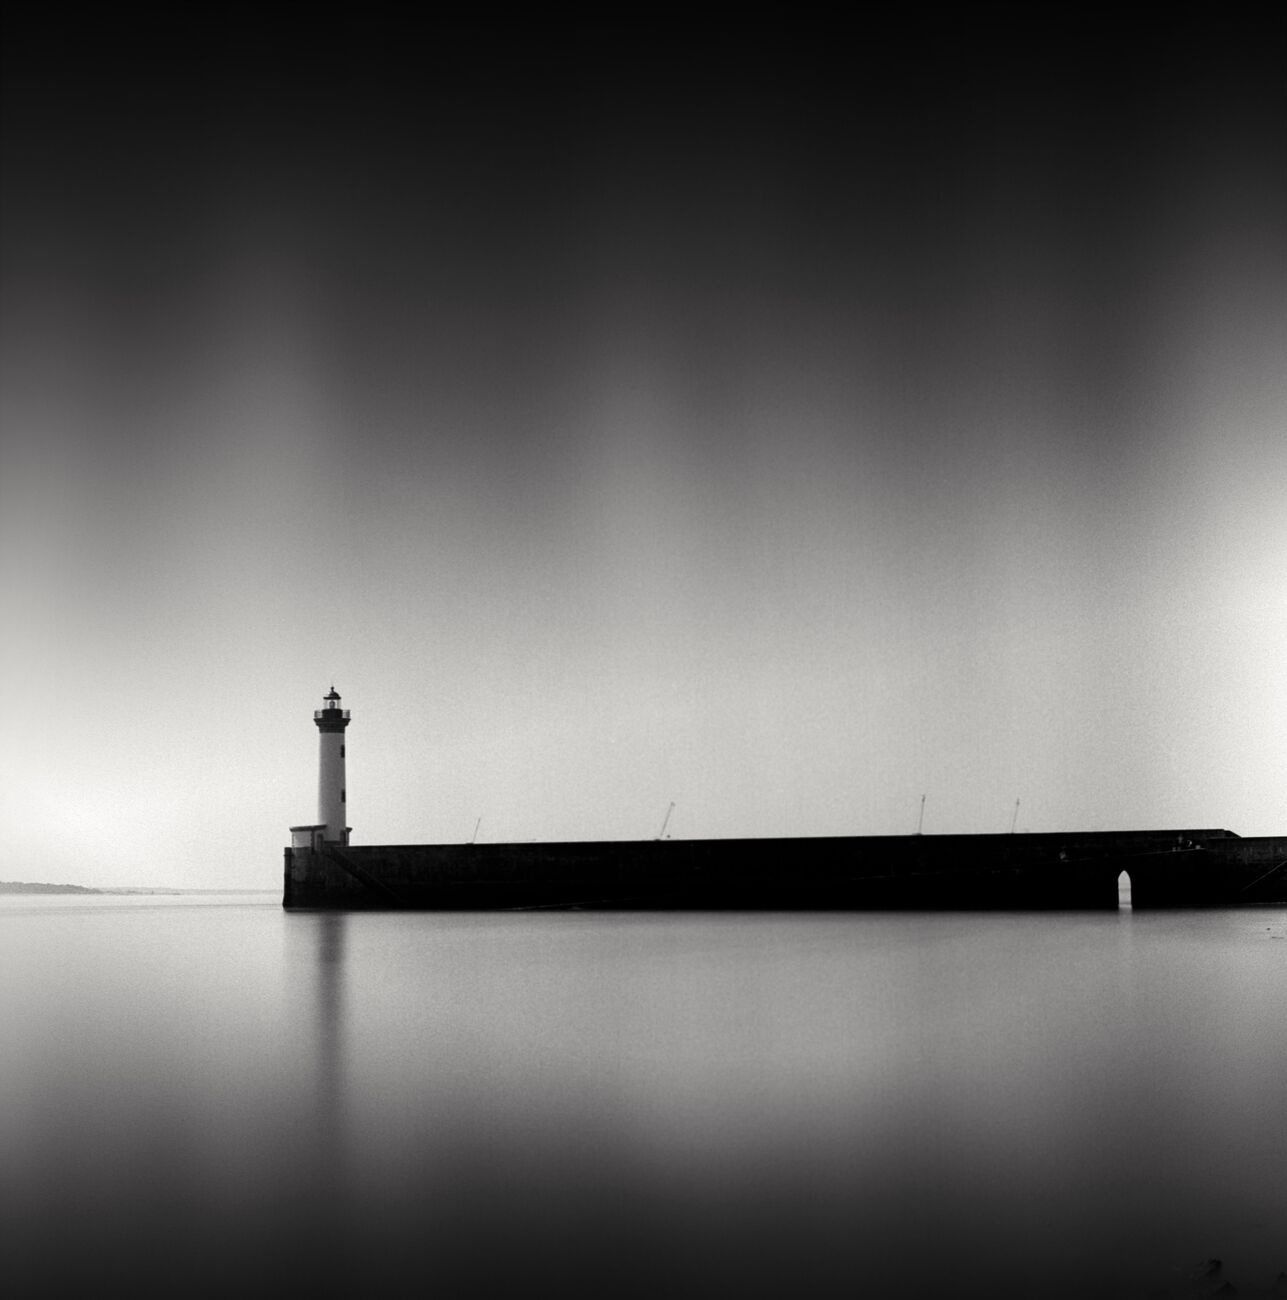 Old Mole And Lighthouse, Saint-Nazaire, France. August 2020. Ref-1357 - Denis Olivier Photography